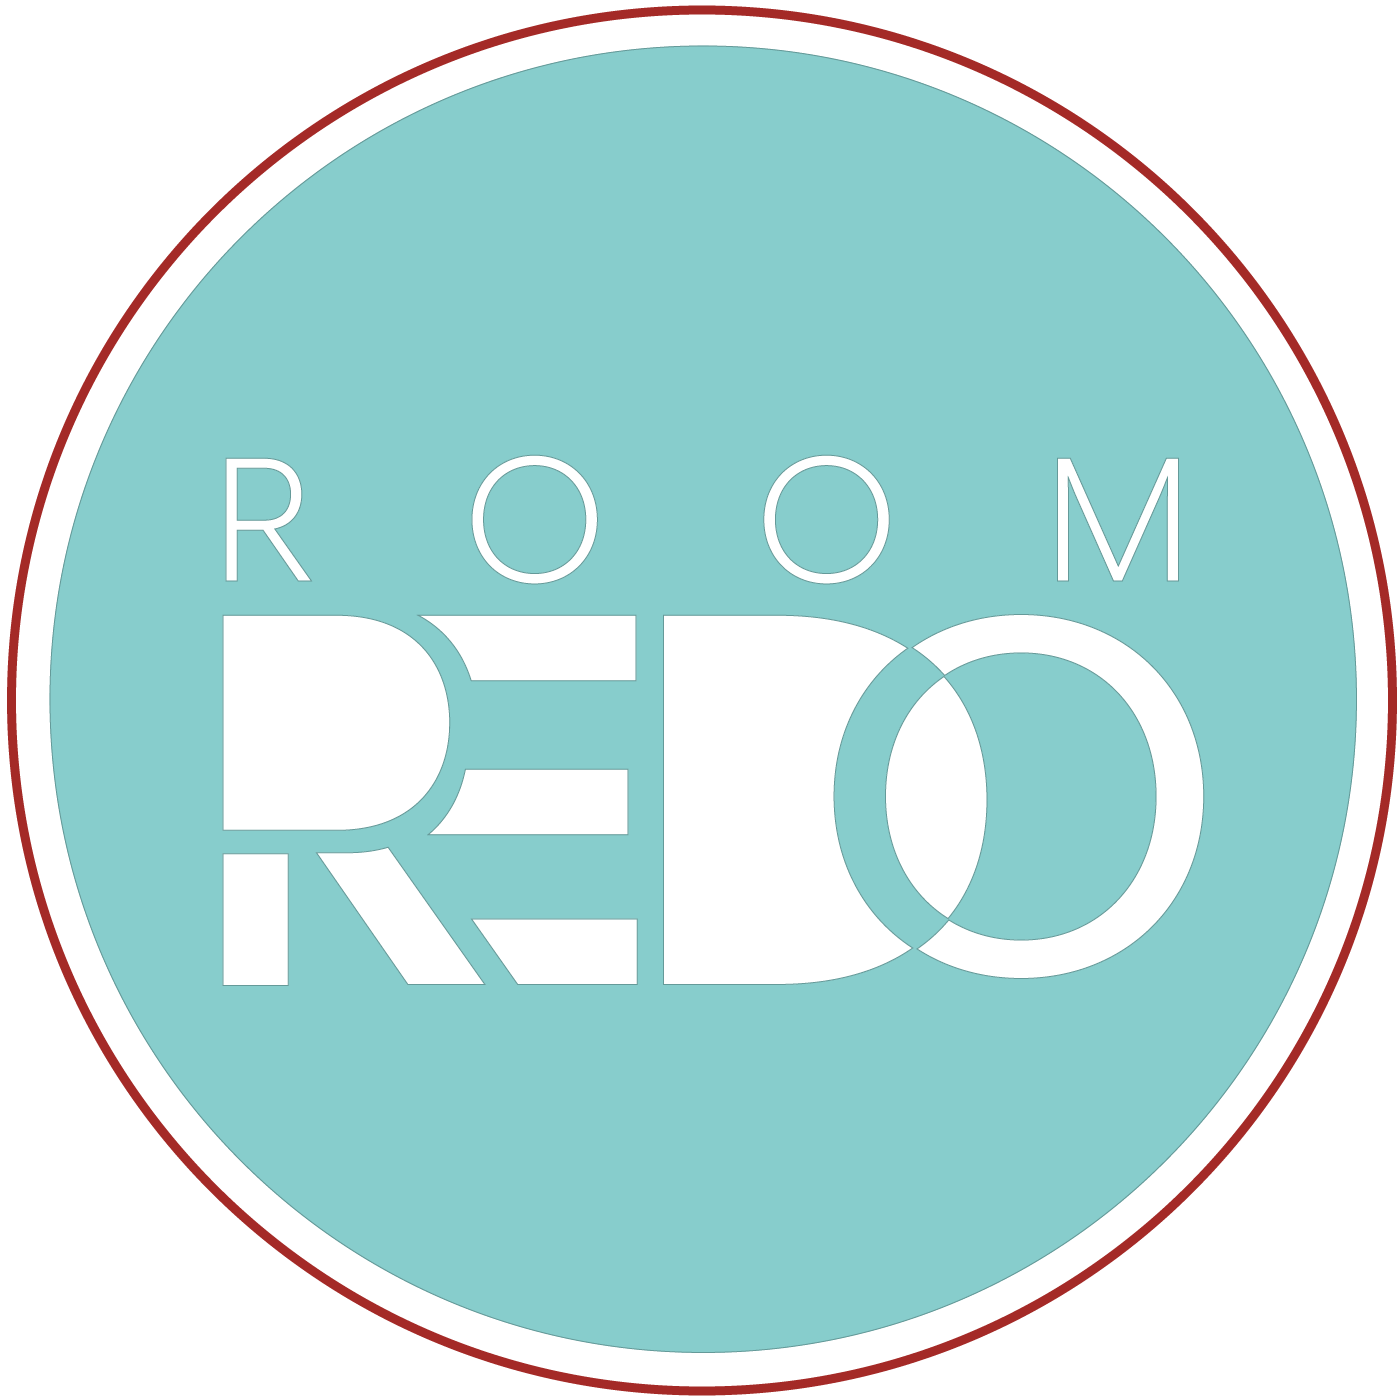 That Has a Red O Logo - About | Room Redo